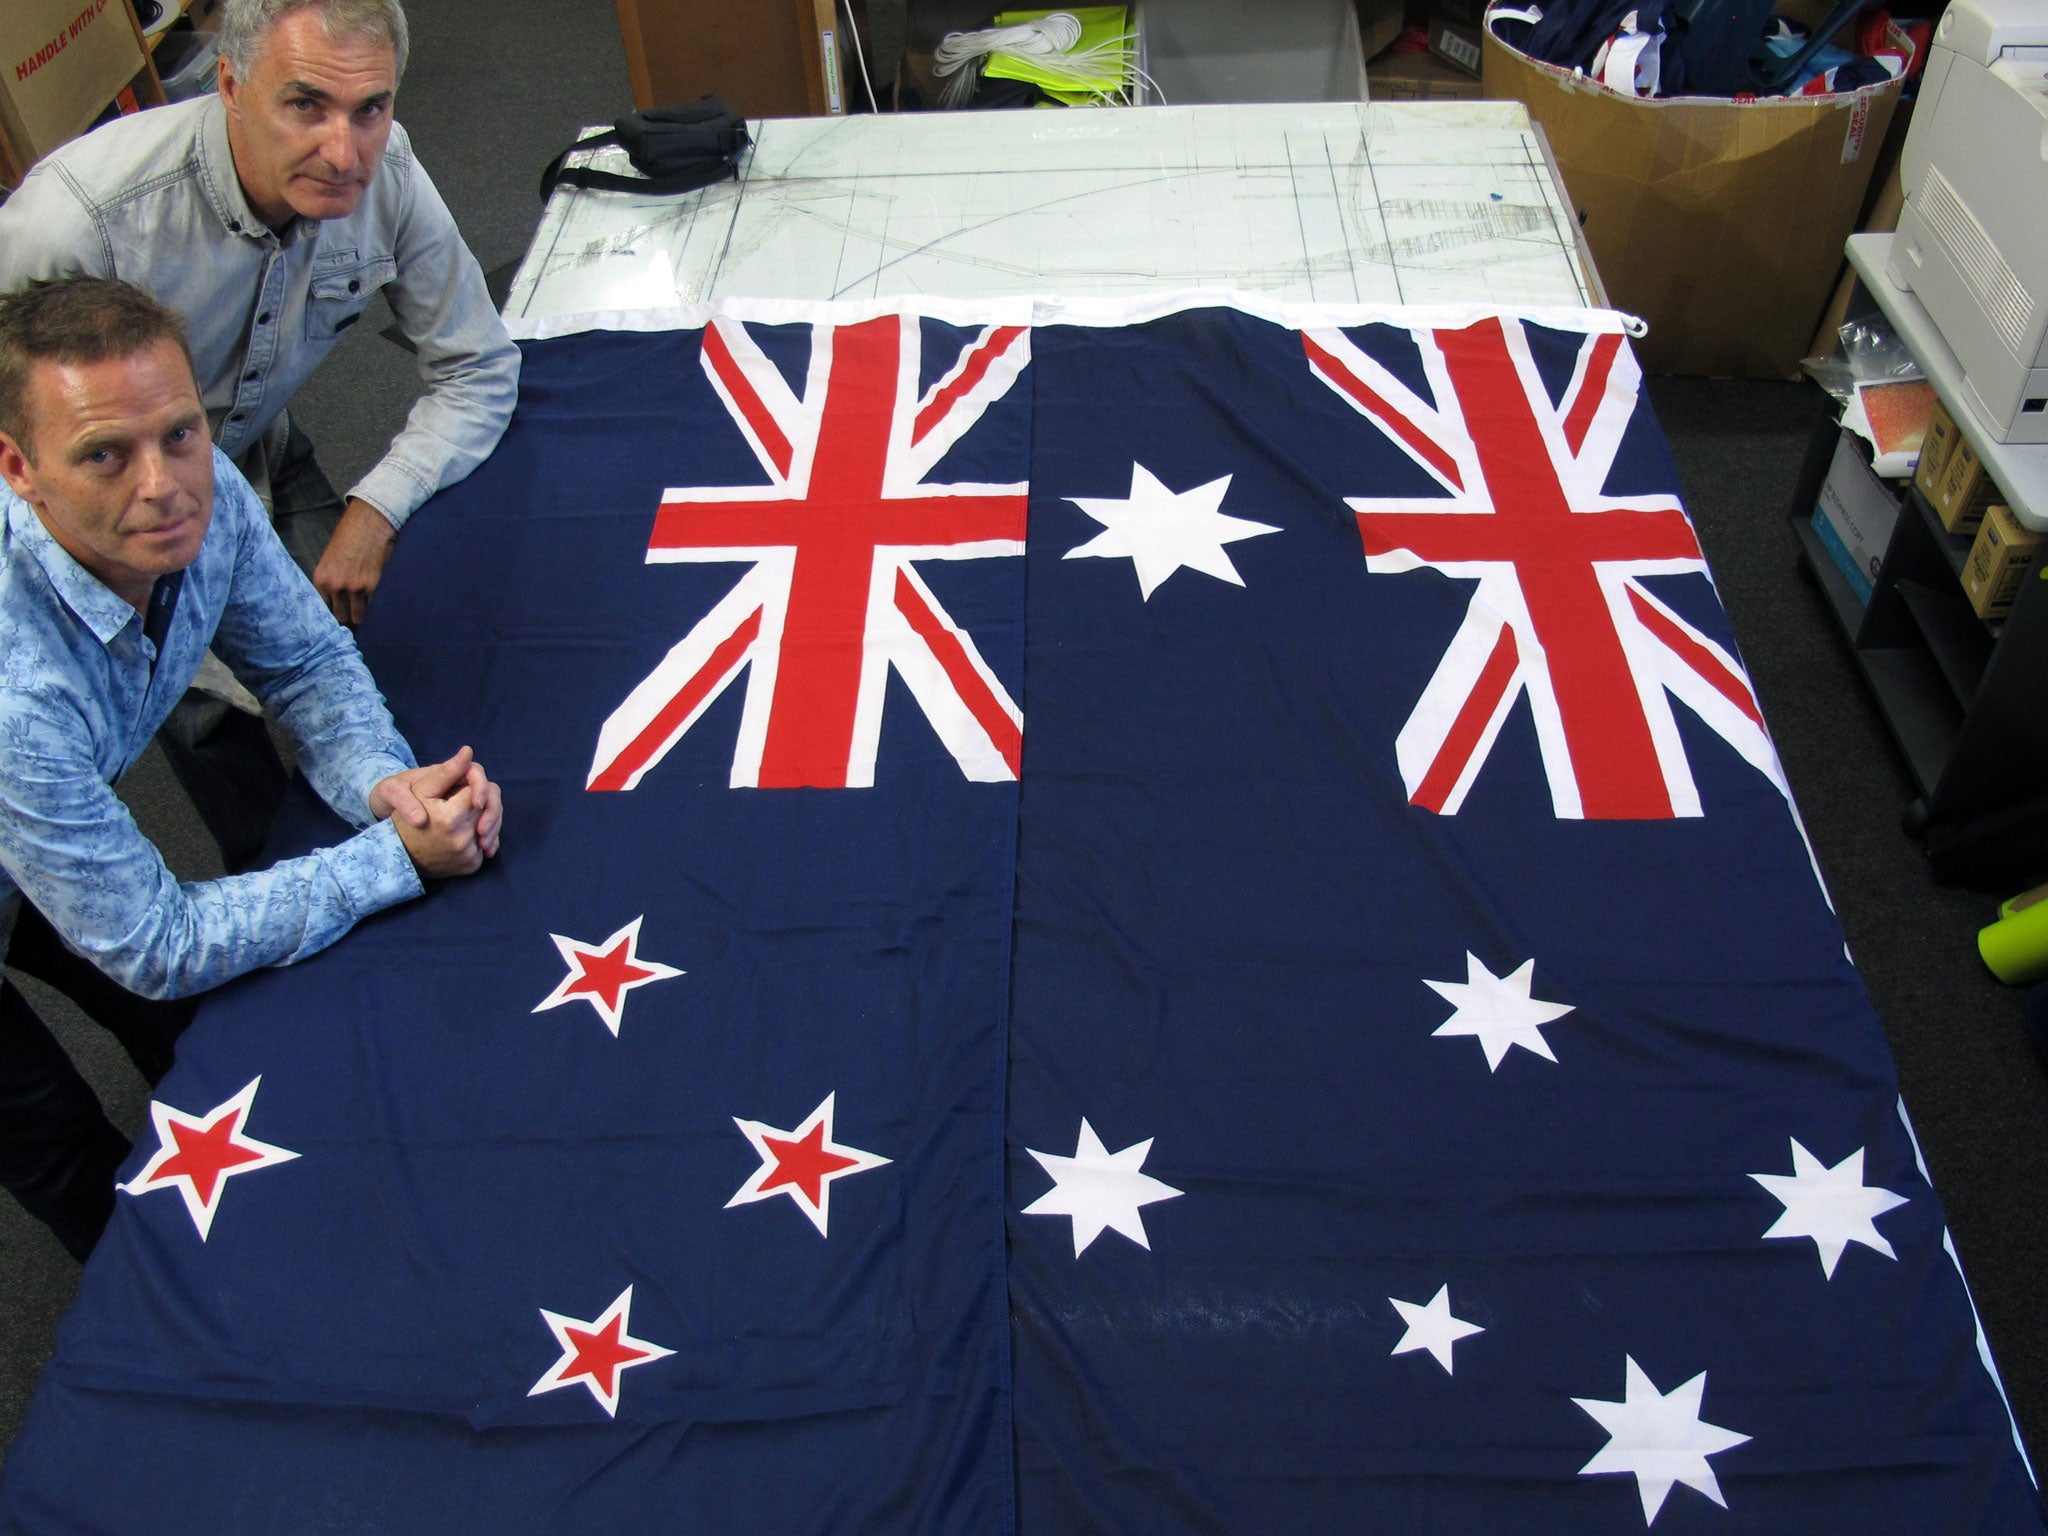 David Moginie, managers at flag manufacturer Flagmakers, pose next to flags of New Zealand, left, and Australia, in their factory near Wellington, New Zealand. New Zealanders will get to vote soon on whether to change their national flag, which many view